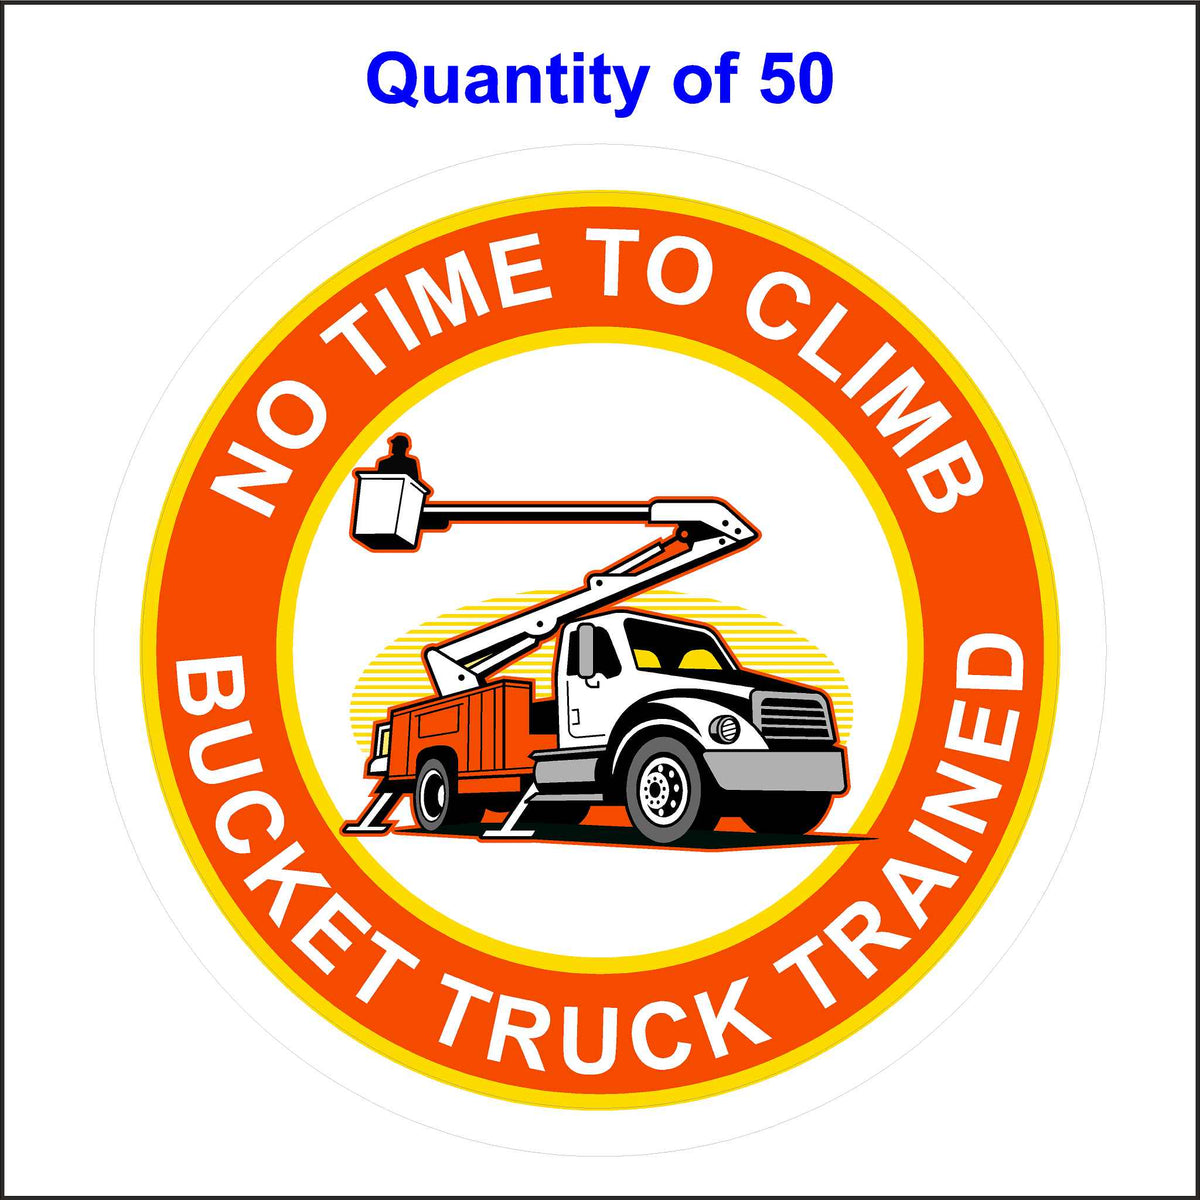 No Time To Climb Bucket Truck Trained Stickers. 50 Quantity.